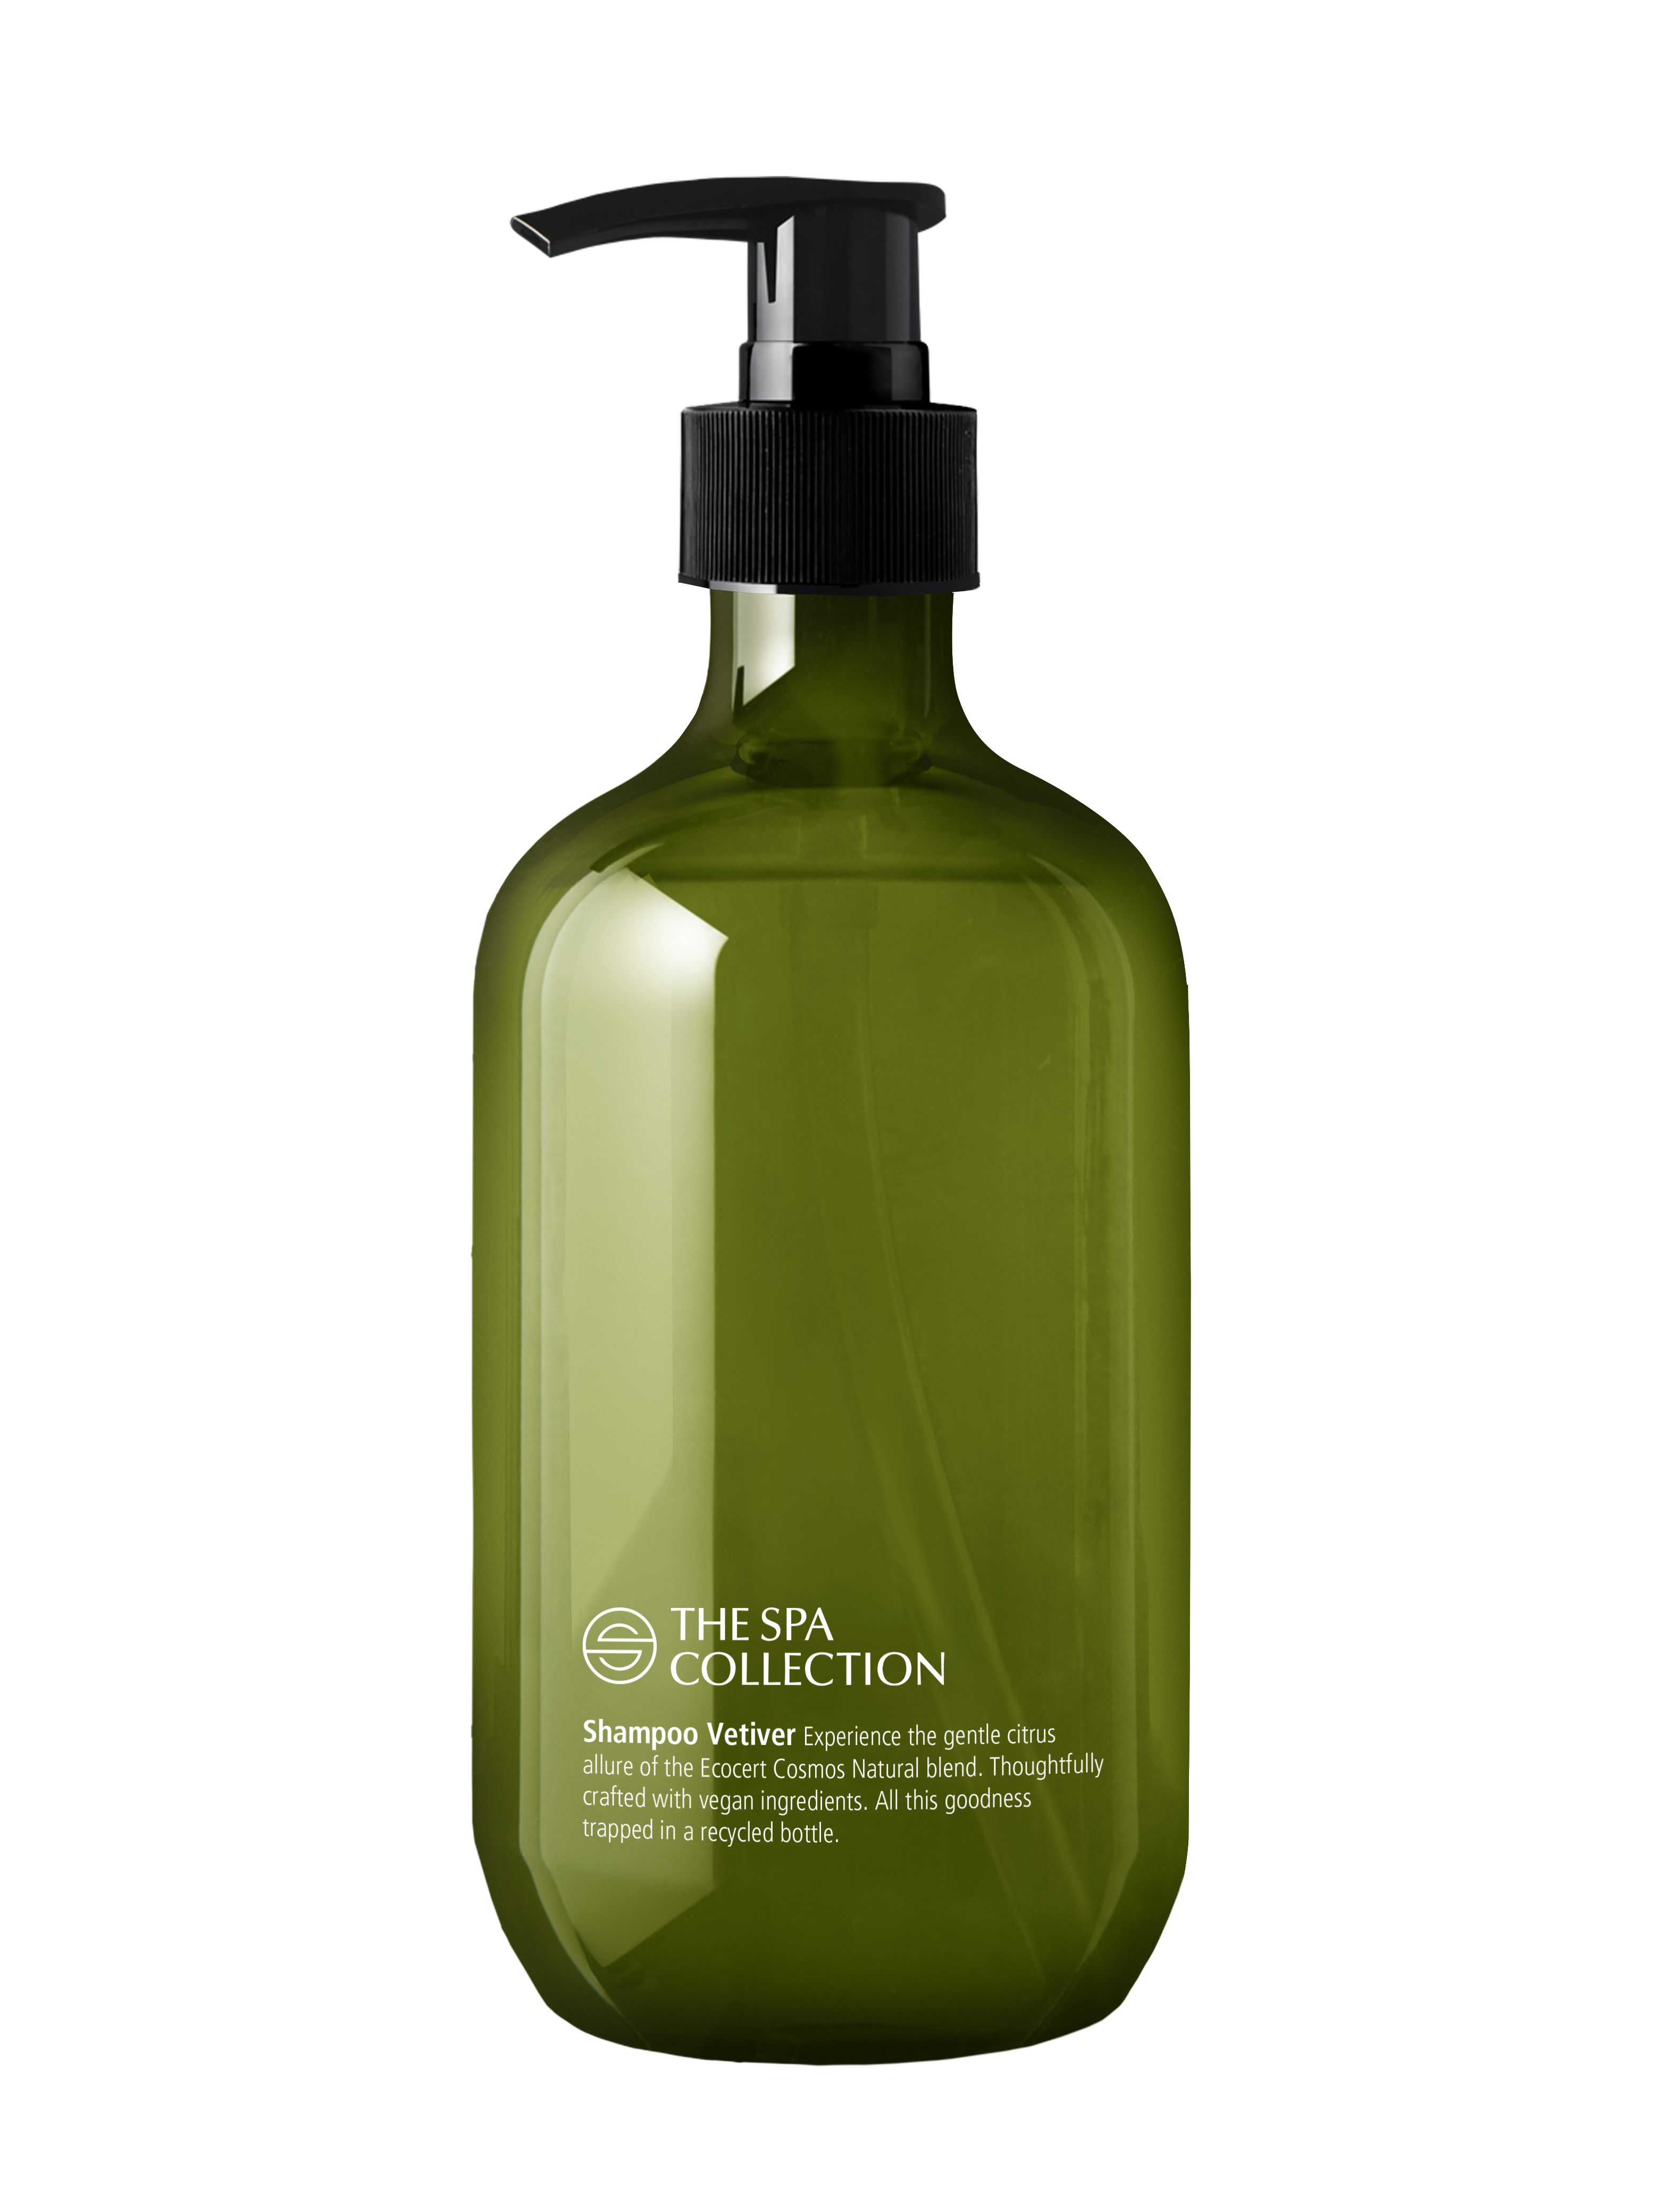 Shampoo ecocert - 475ml recycled bottle - The Spa Collection Vetiver